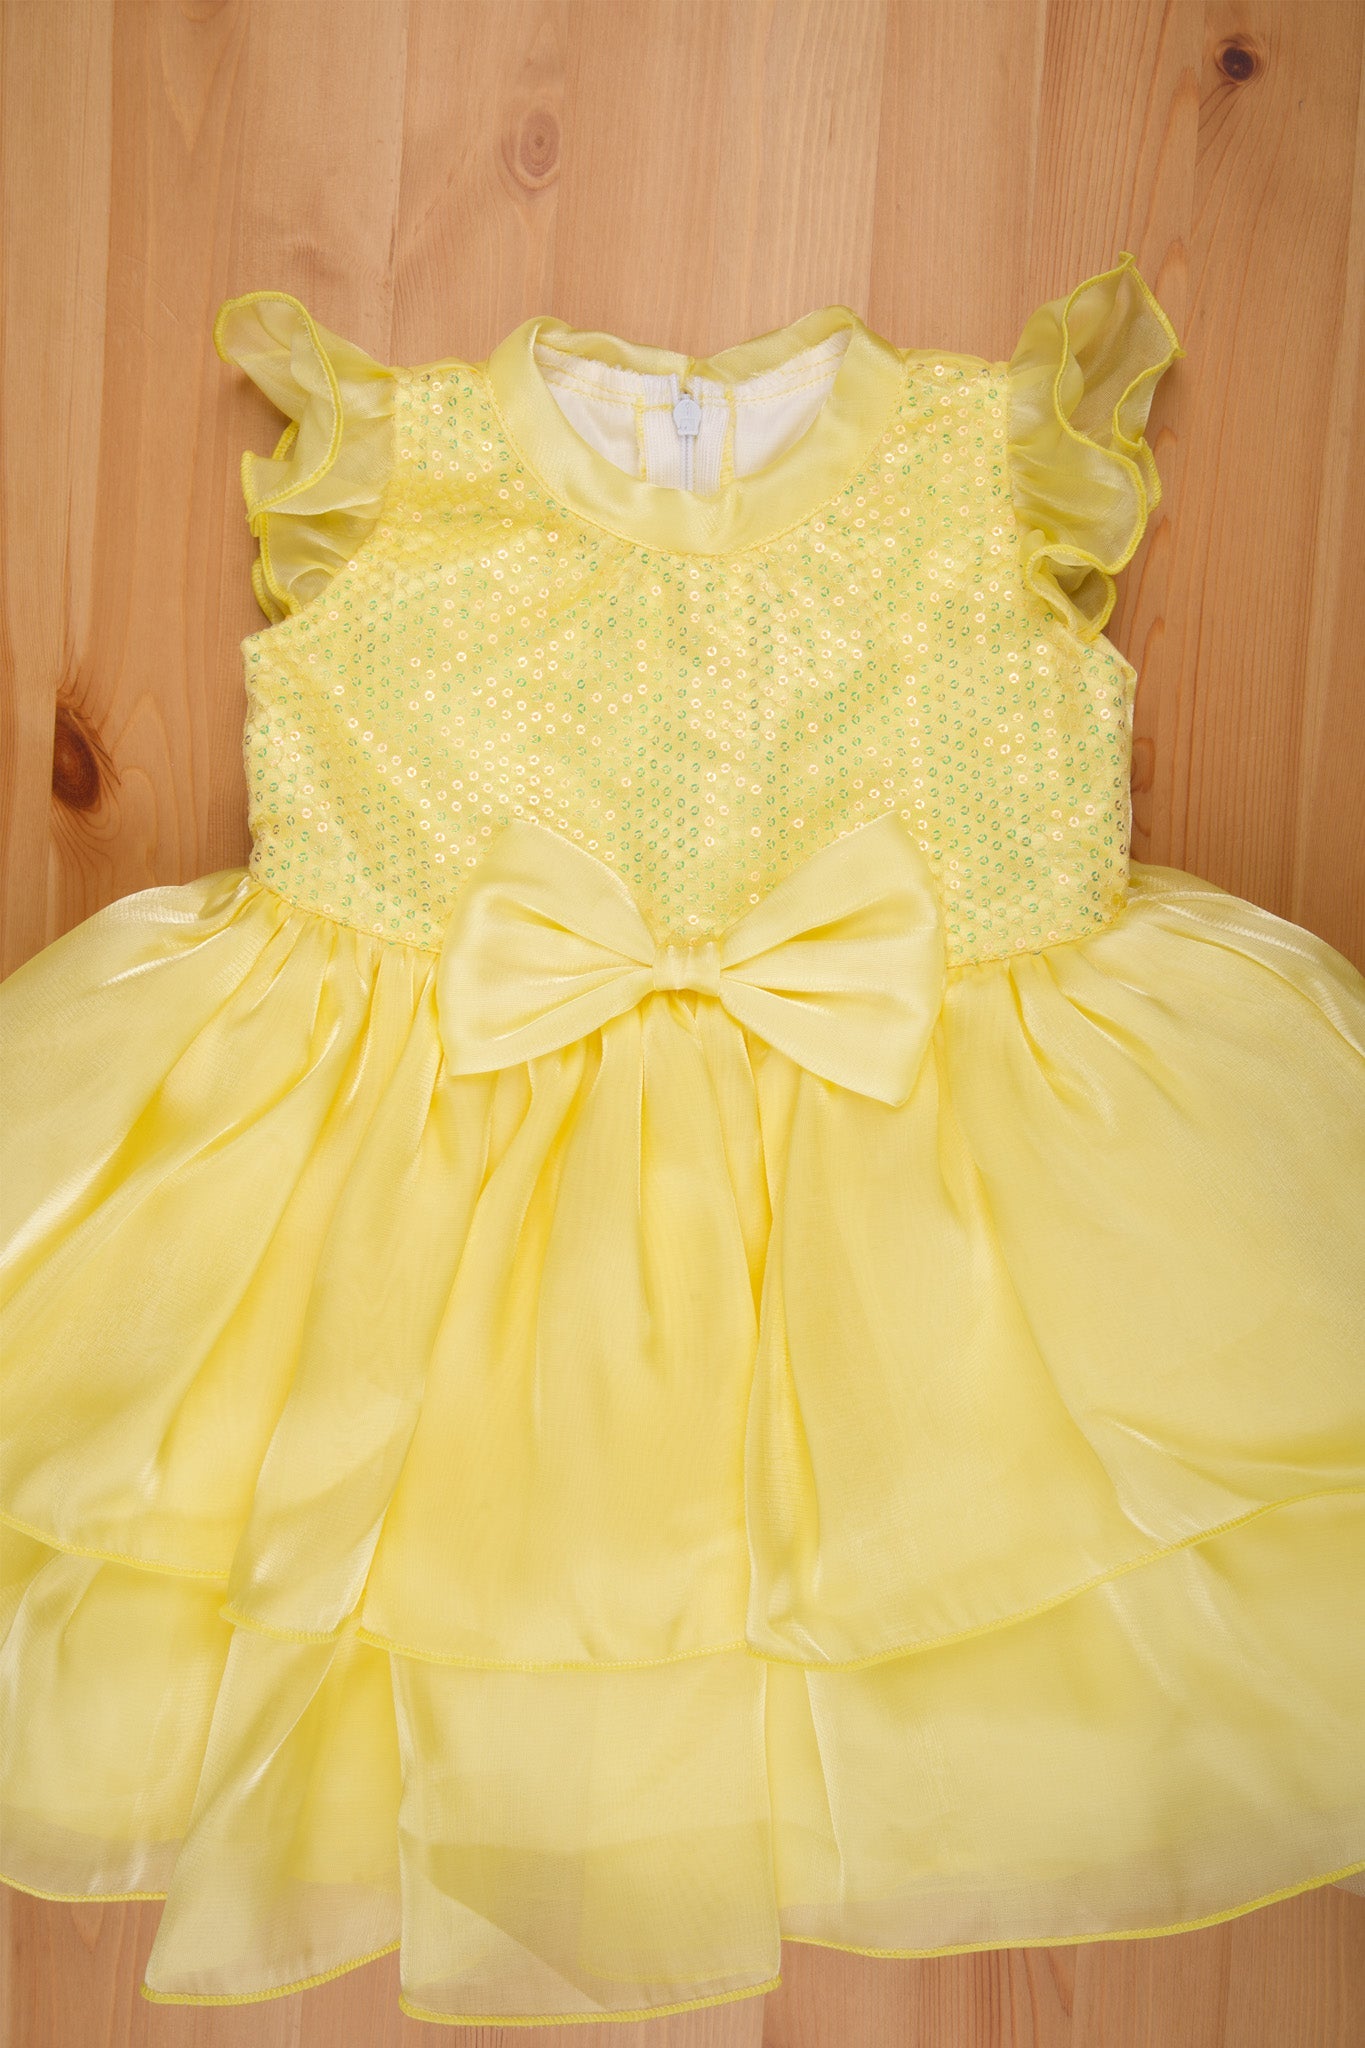 2021 Vintage Spanish Princess Princess Evening Gown For Baby Girls Yellow  Frock Lolita Dress With Lace Detailing Perfect For Parties And Special  Occasions From Wuhuamaa, $43.5 | DHgate.Com